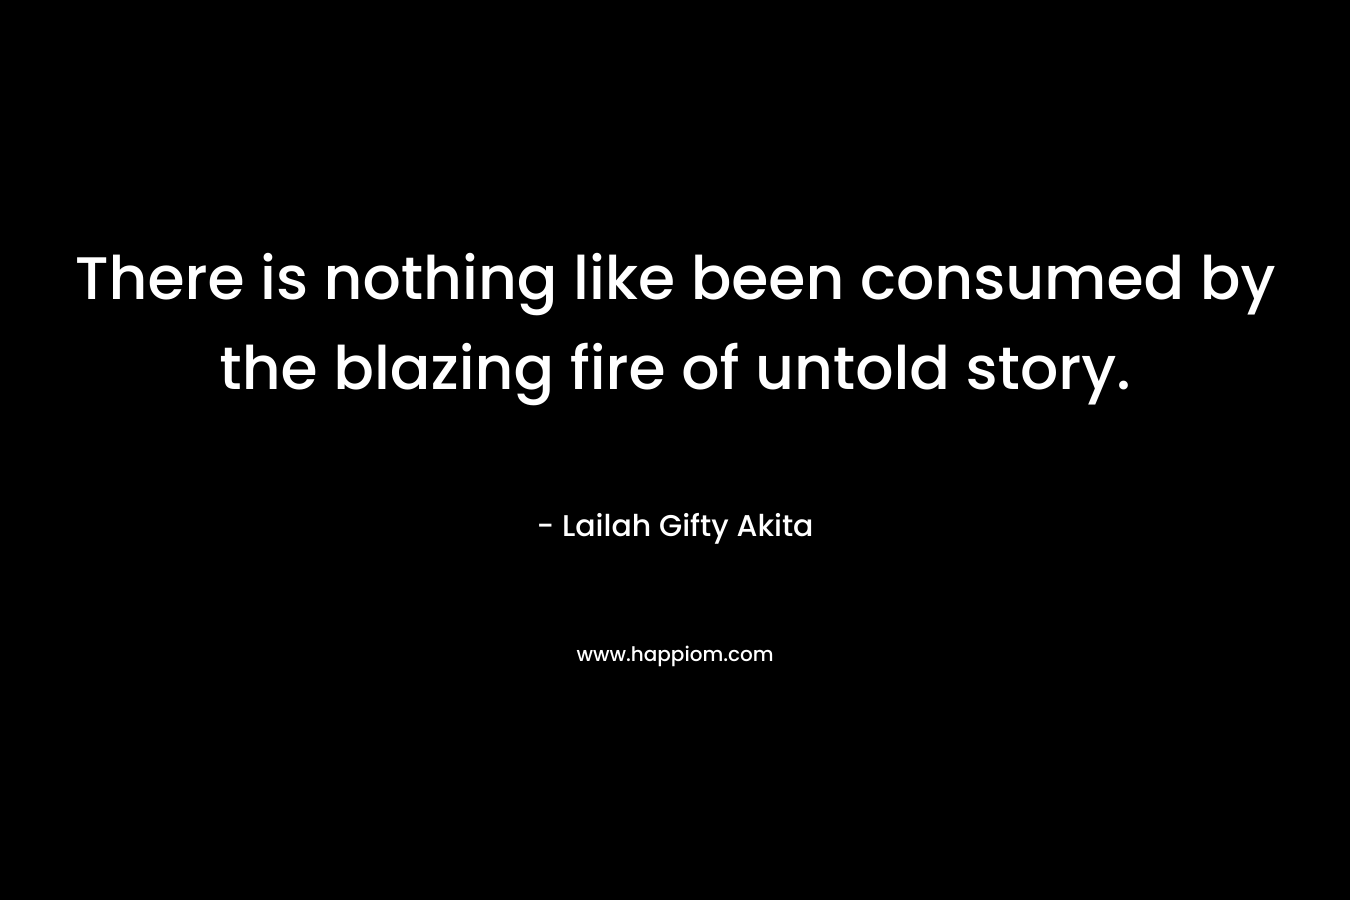 There is nothing like been consumed by the blazing fire of untold story.